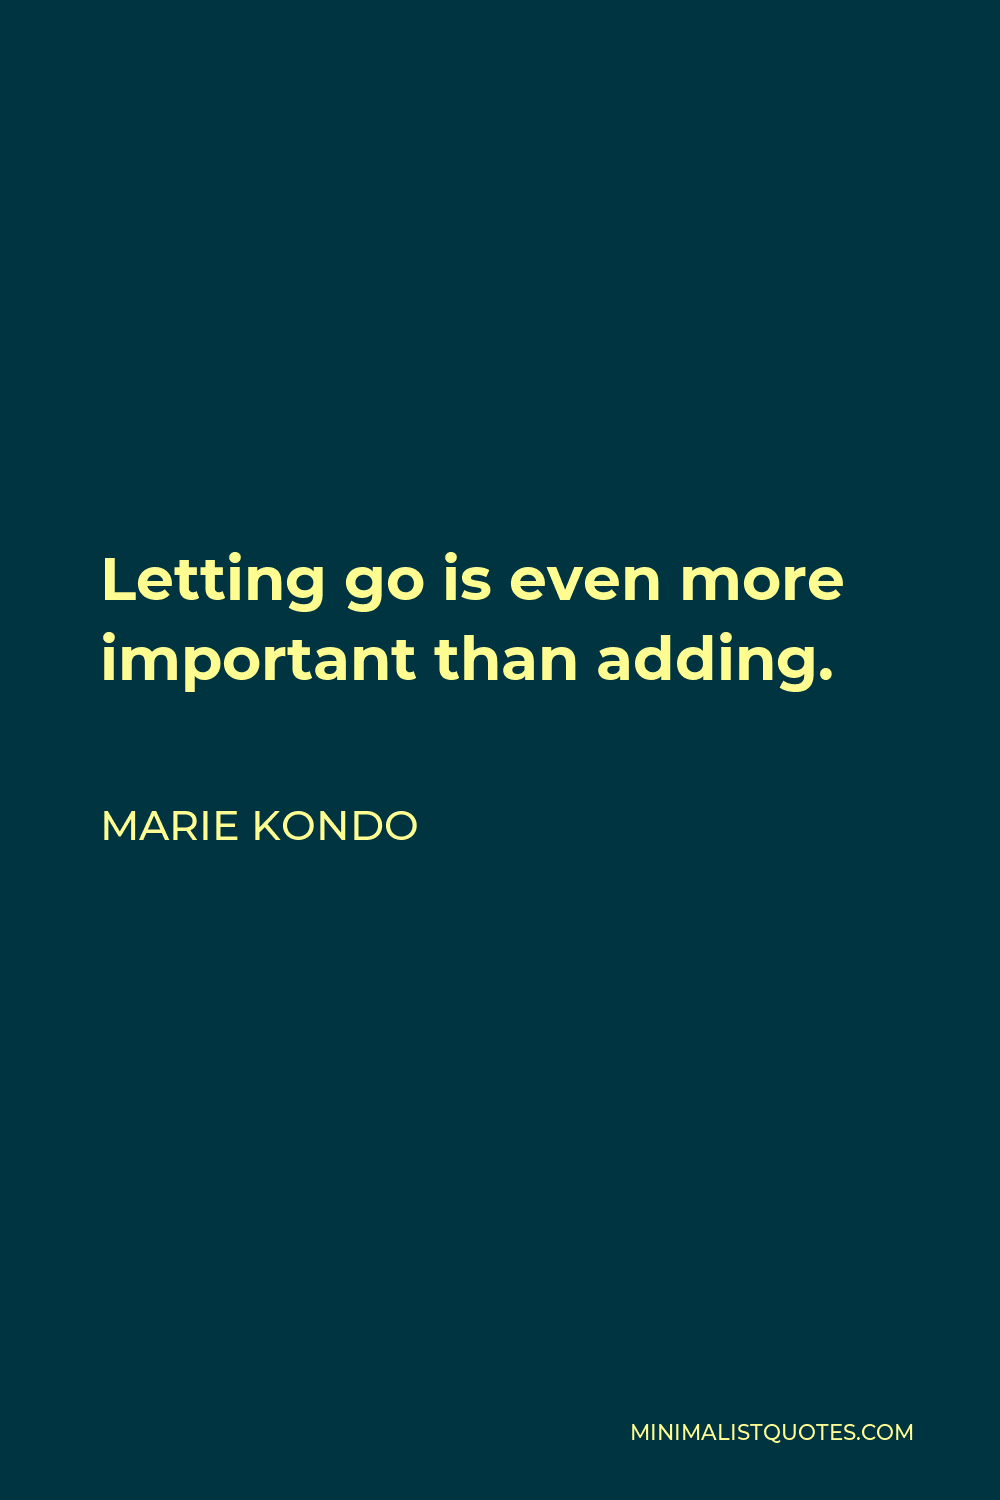 Marie Kondo Quote - Letting go is even more important than adding.